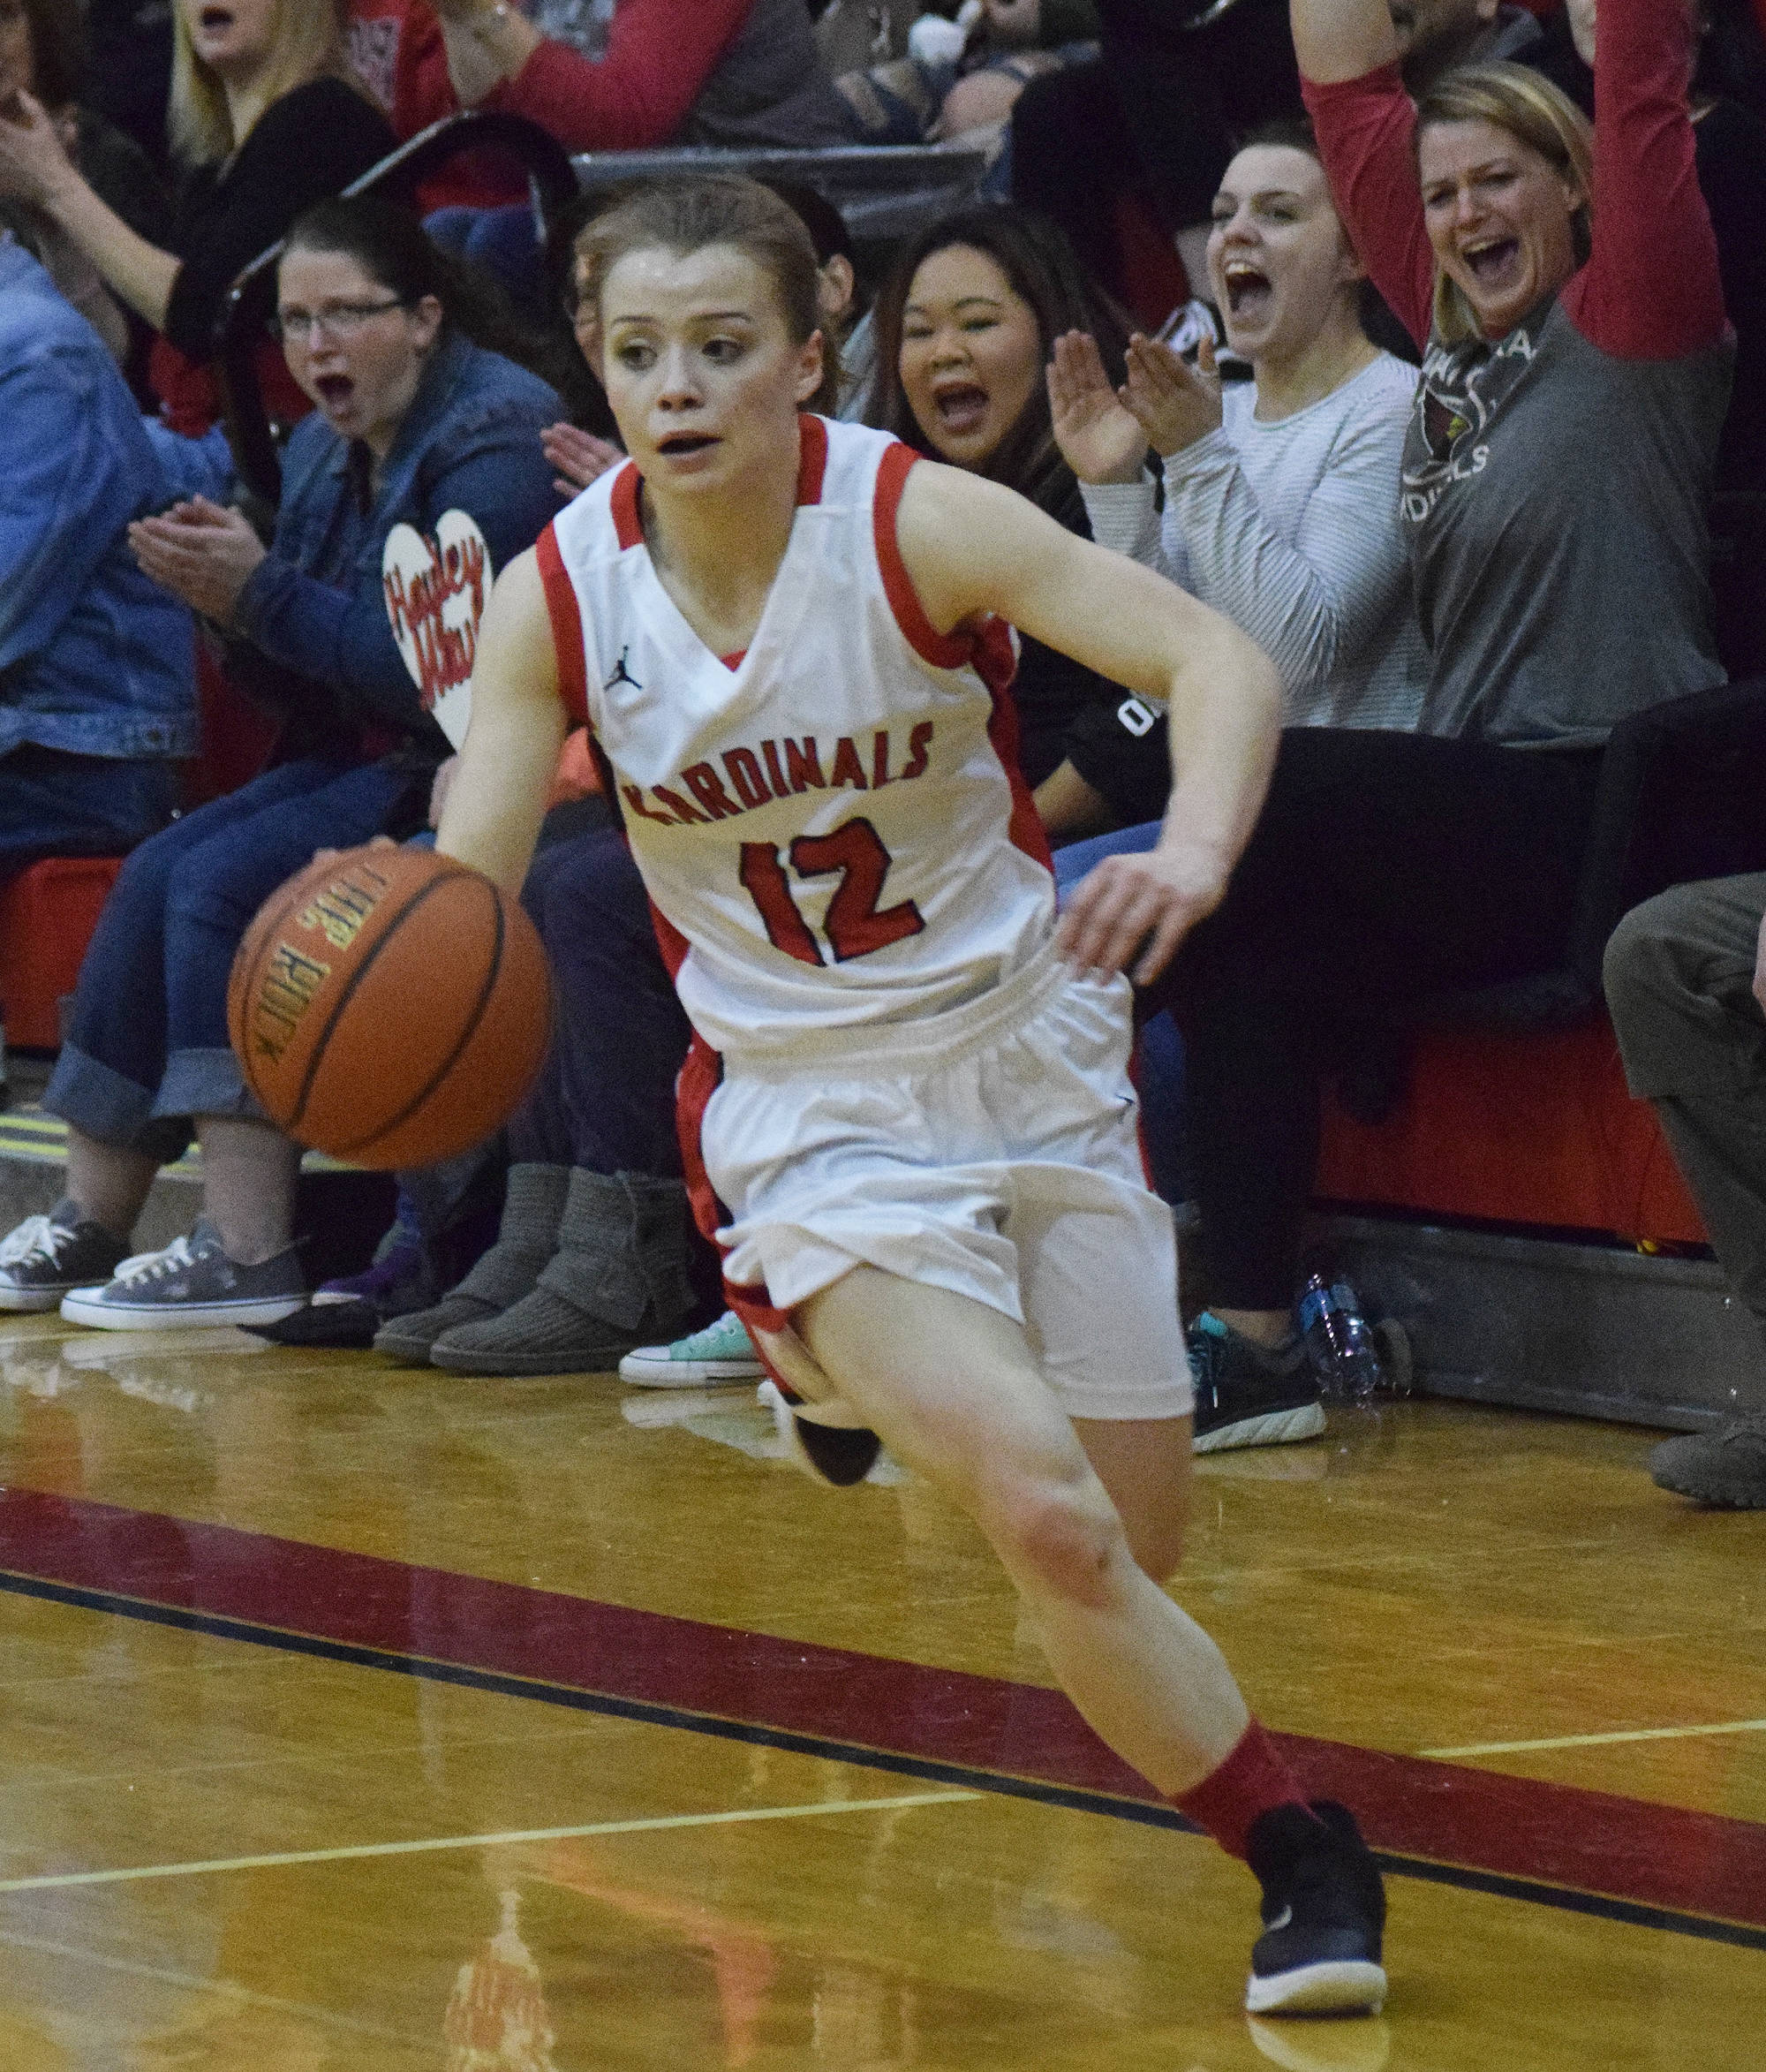 Kenai’s Hayley Maw sprints down the court after a steal Saturday against Soldotna in a nonconference clash at Kenai Central High School. (Photo by Joey Klecka/Peninsula Clarion)